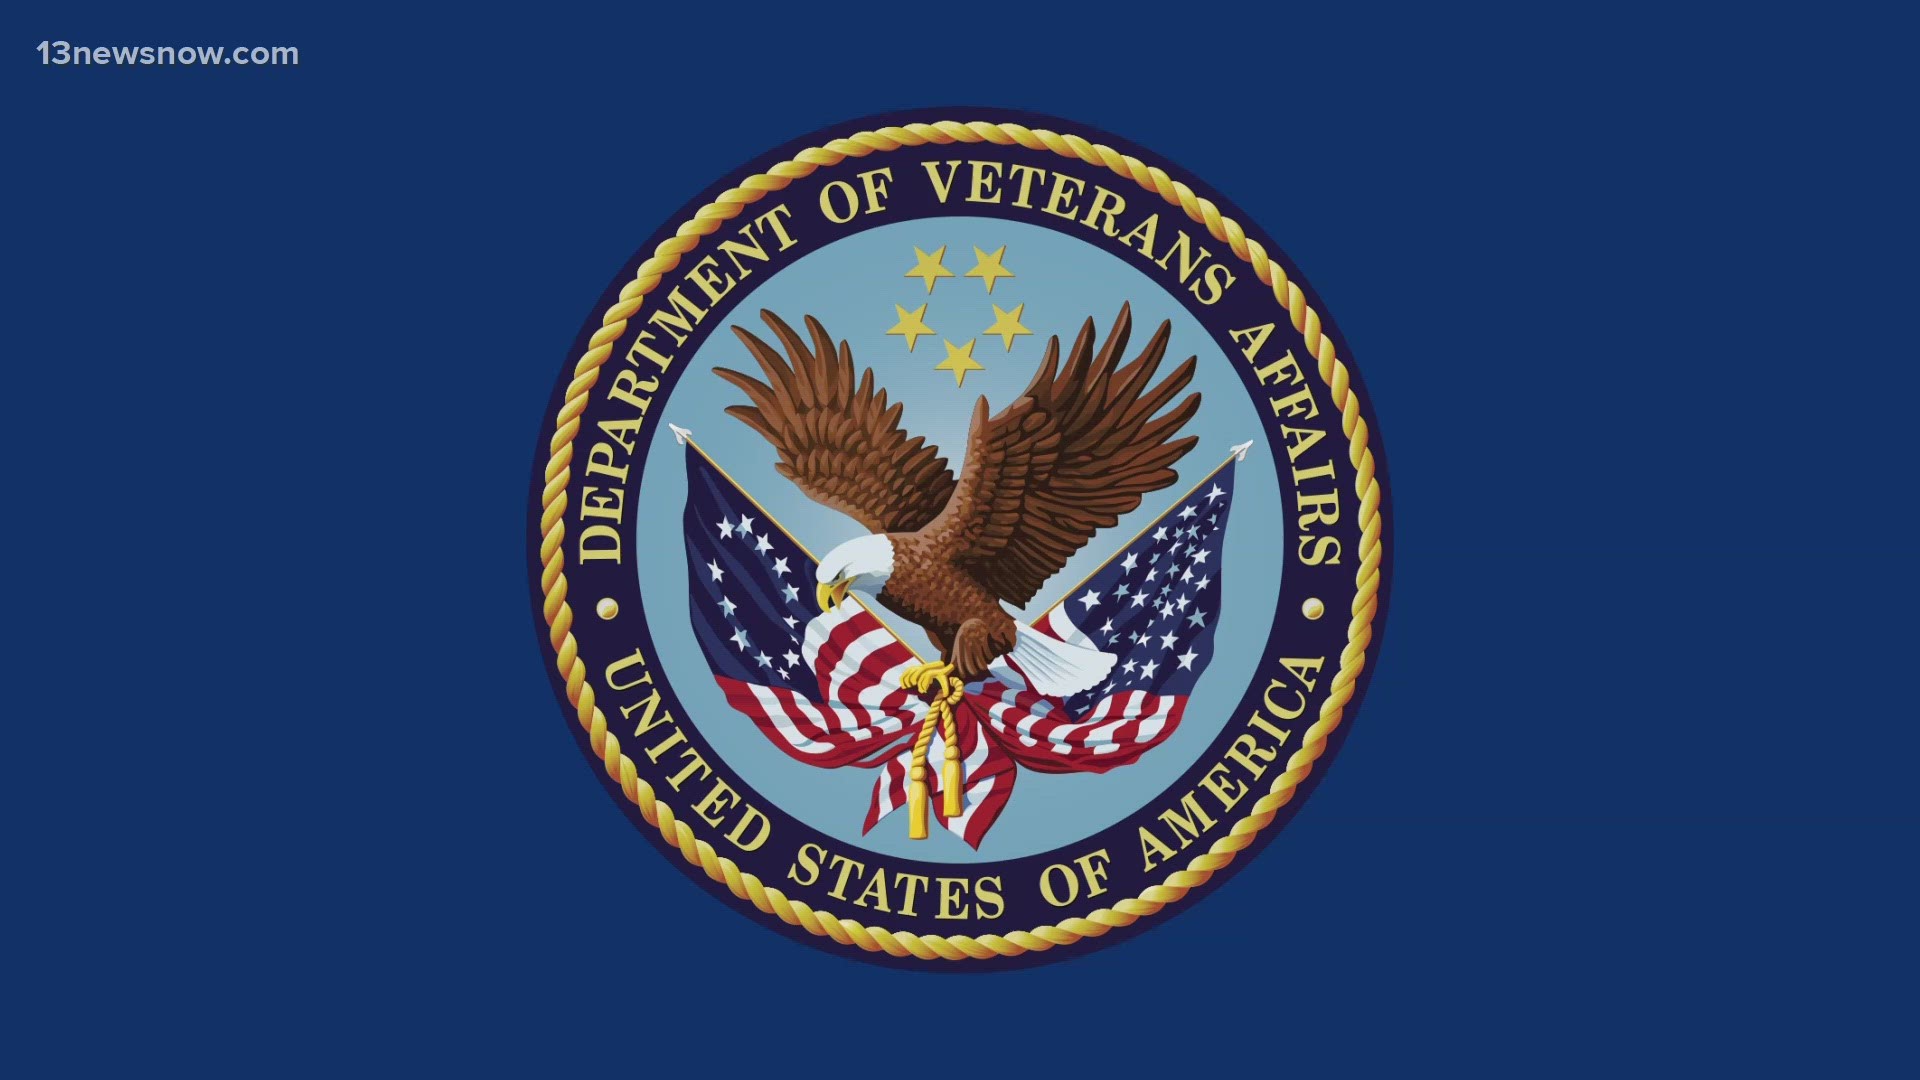 Despite lawmakers' concerns about governmental red tape it hard for veterans to use the GI Bill, the VA defended its practices.